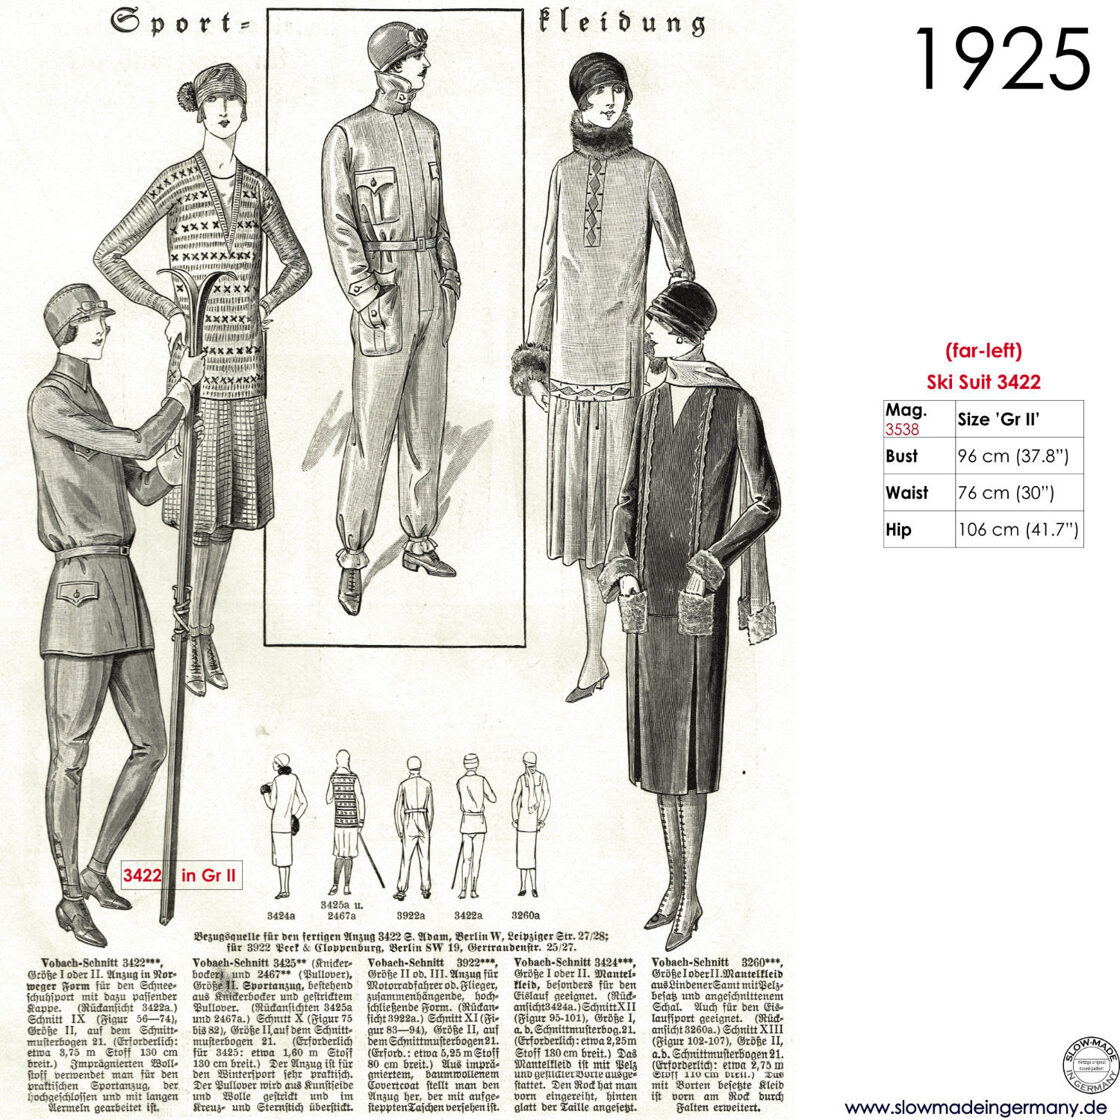 Vintage Skiwear Clothing from 1920s to the 1950s